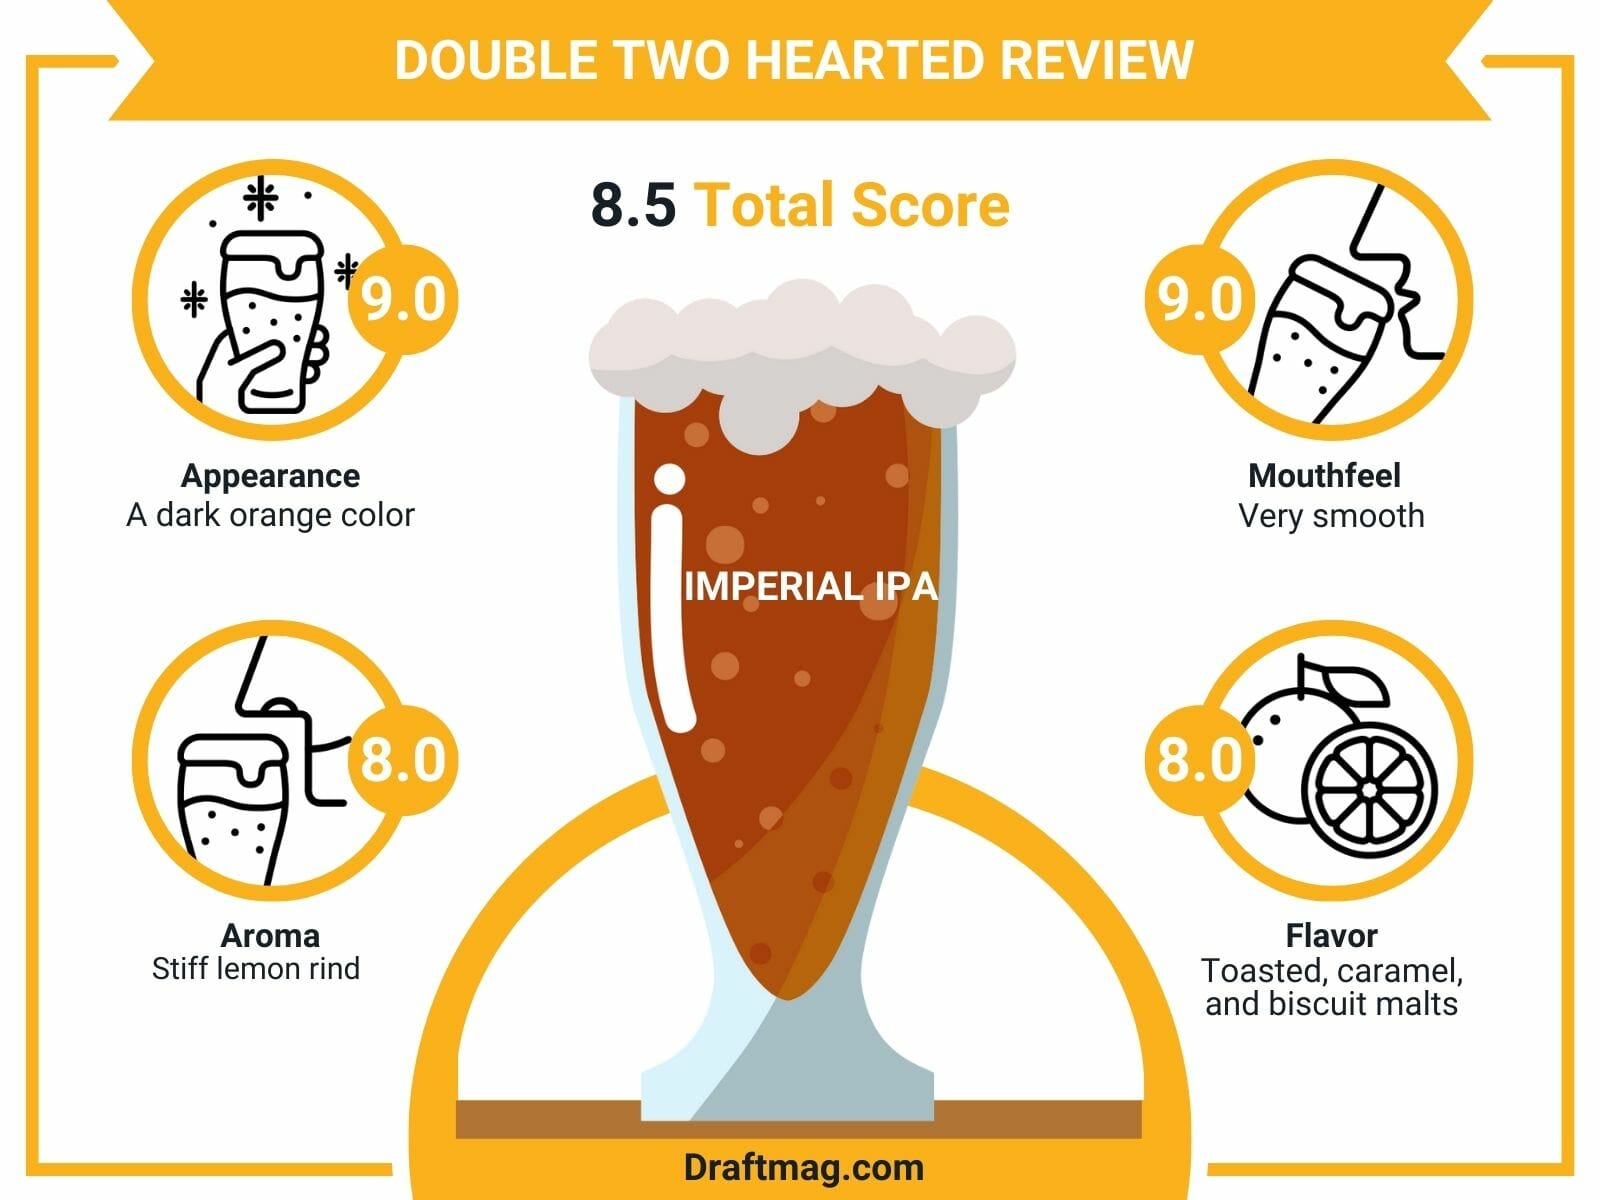 Double Two Hearted Review Infographic